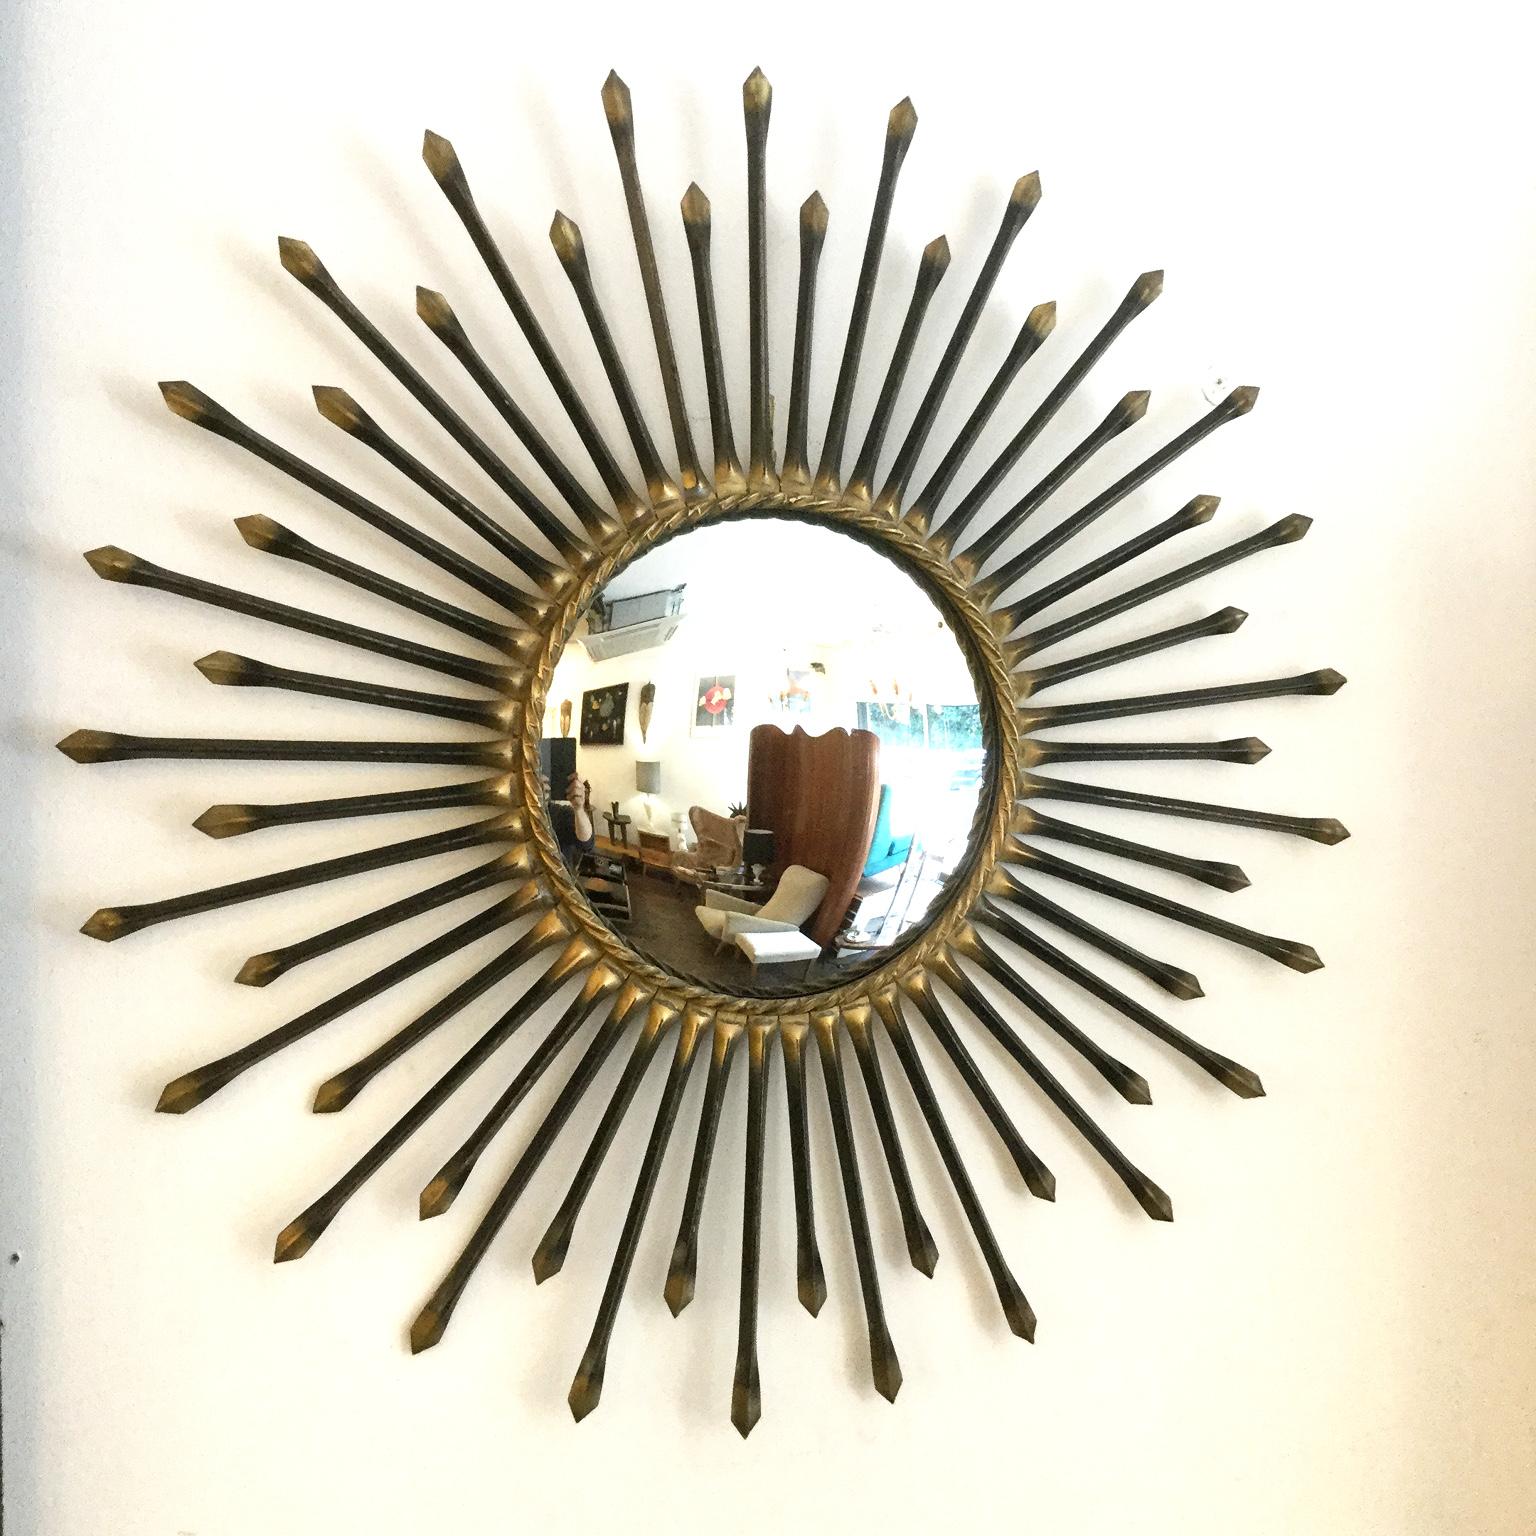 Large sunburst mirror or (witch mirror) manufactured by Chaty Vallauris based in Provence in France.
Metal and gilded frame with an original convex mirror.